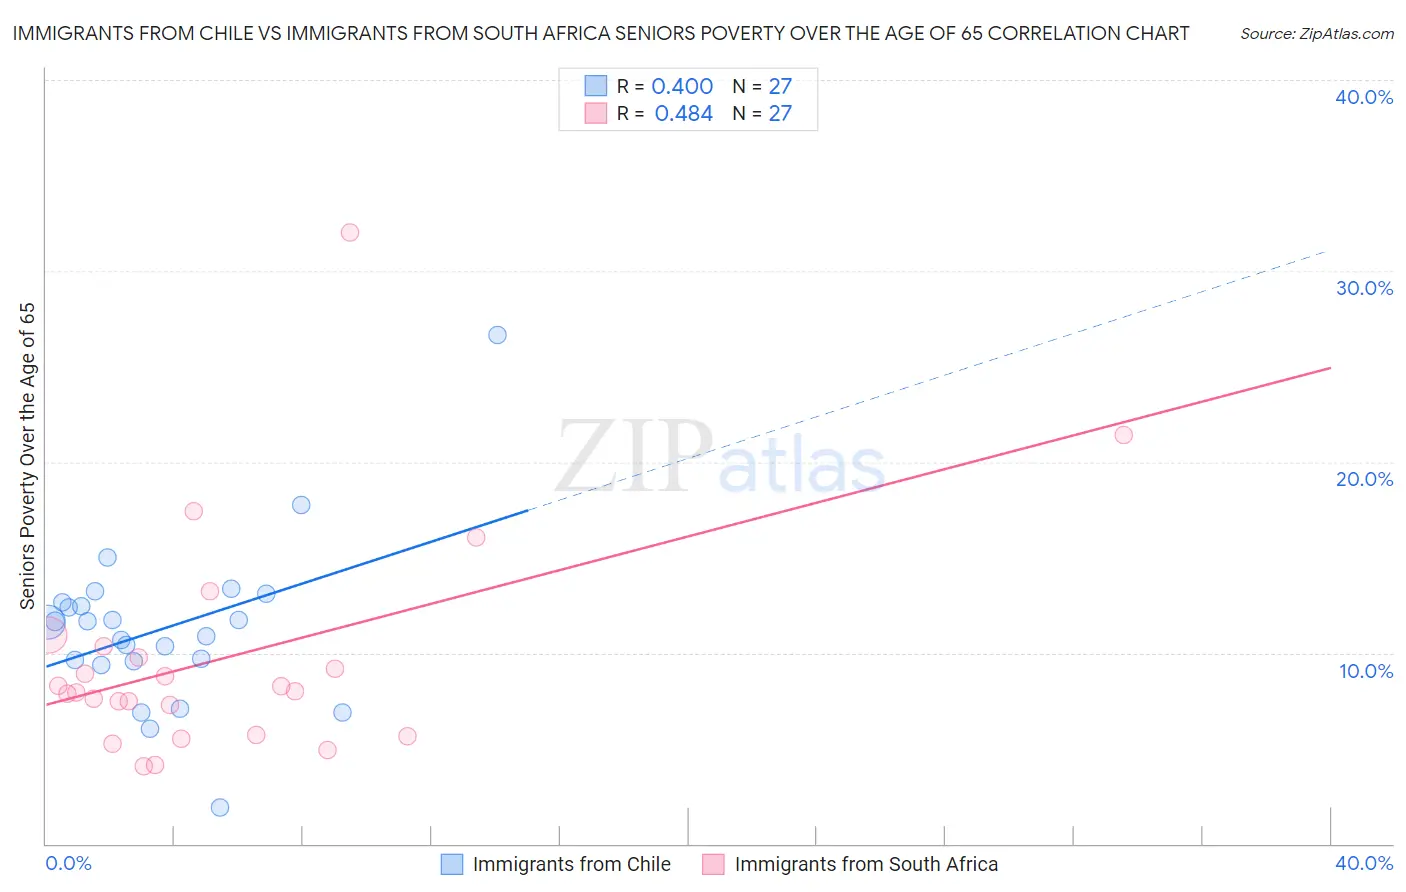 Immigrants from Chile vs Immigrants from South Africa Seniors Poverty Over the Age of 65